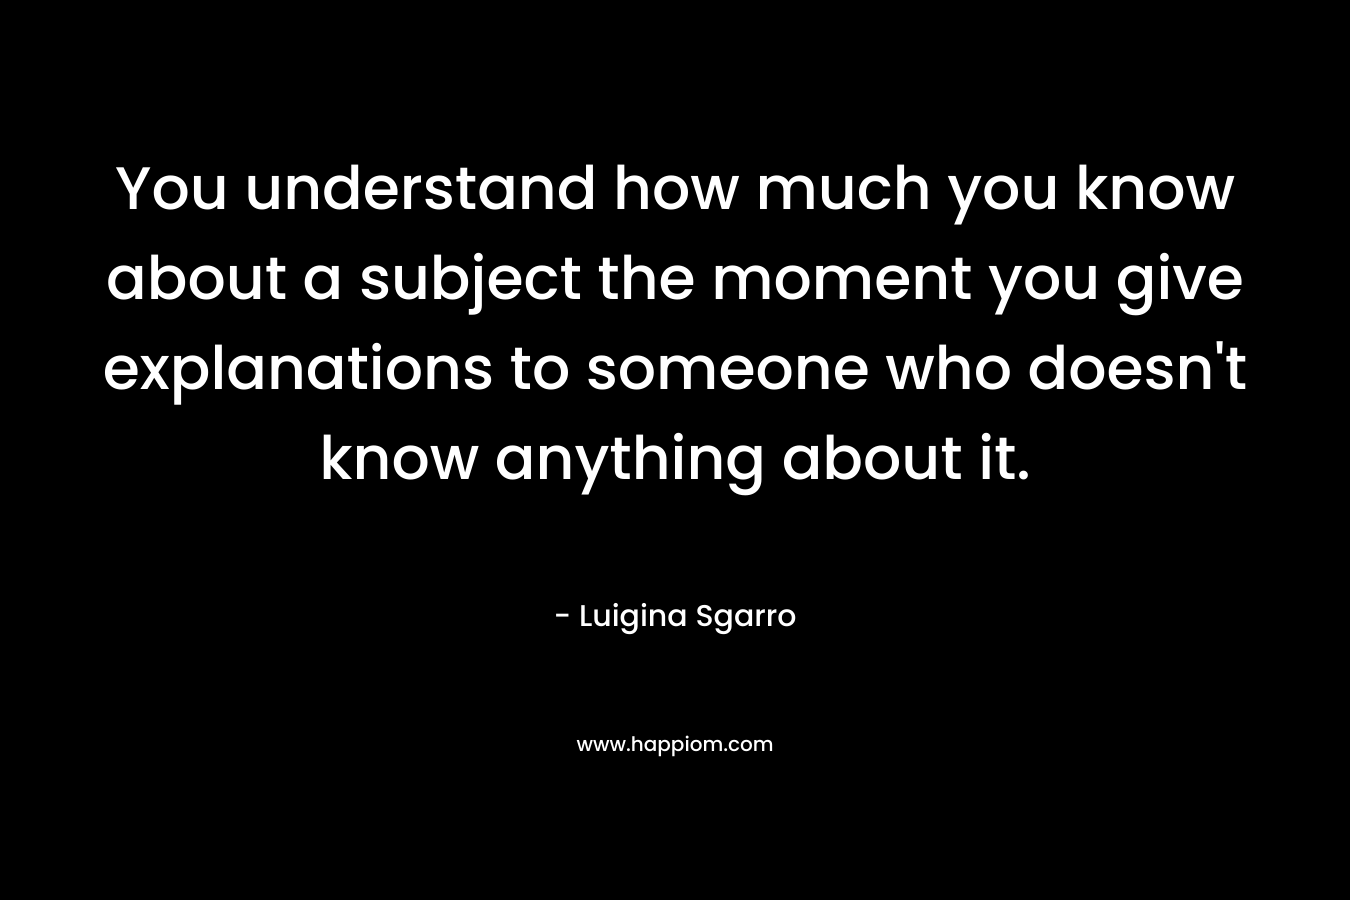 You understand how much you know about a subject the moment you give explanations to someone who doesn't know anything about it.